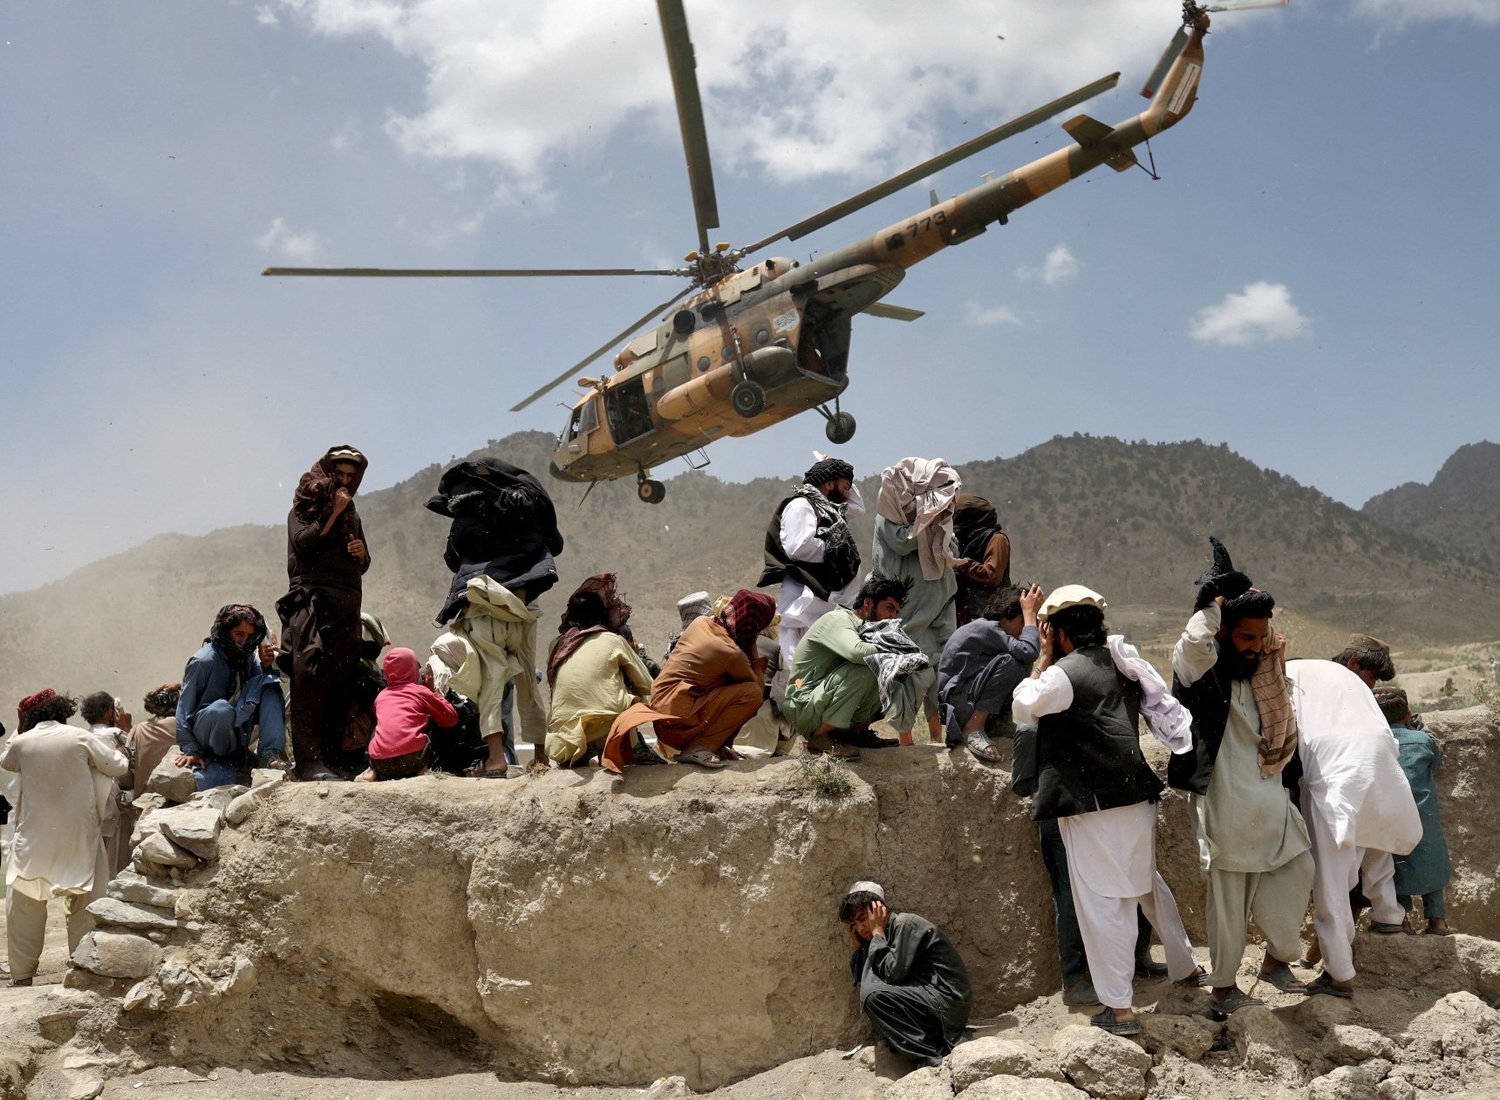 A Taliban helicopter takes off June 23 after carrying aid to the site of a strong earthquake the previous day in Gayan, Afghanistan.